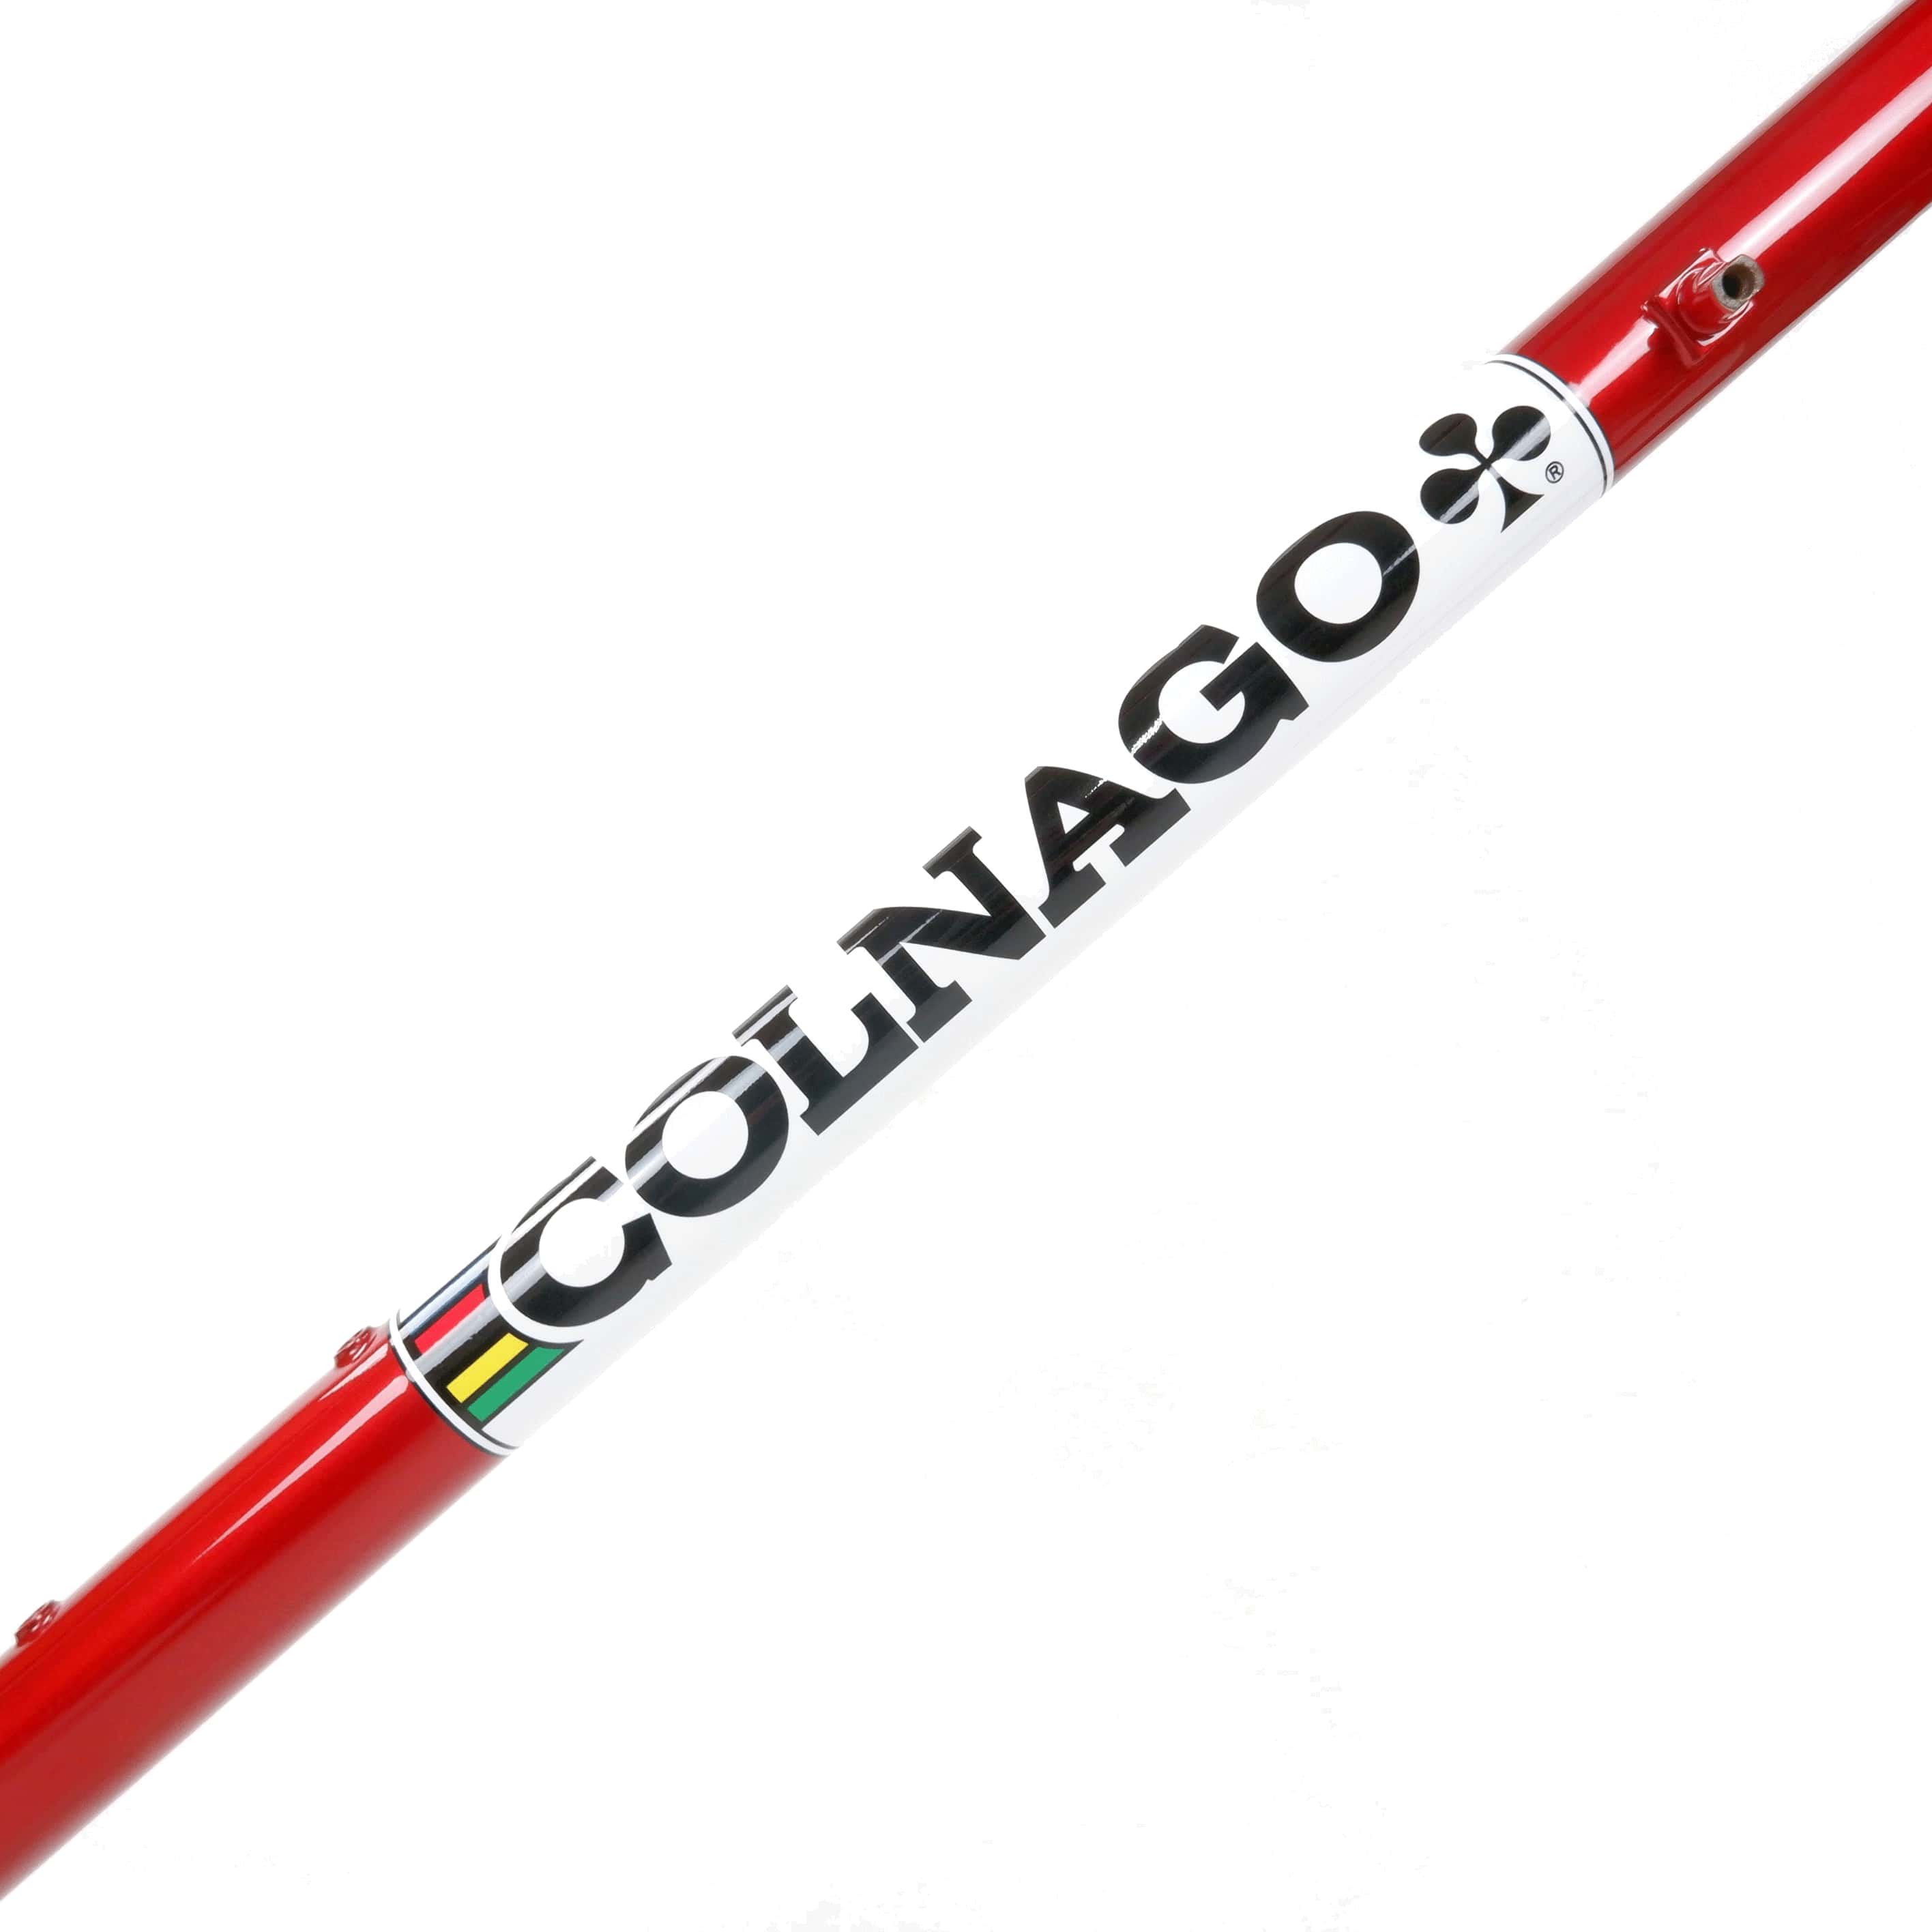 Colnago Super red and white frame, close up of down tube decals